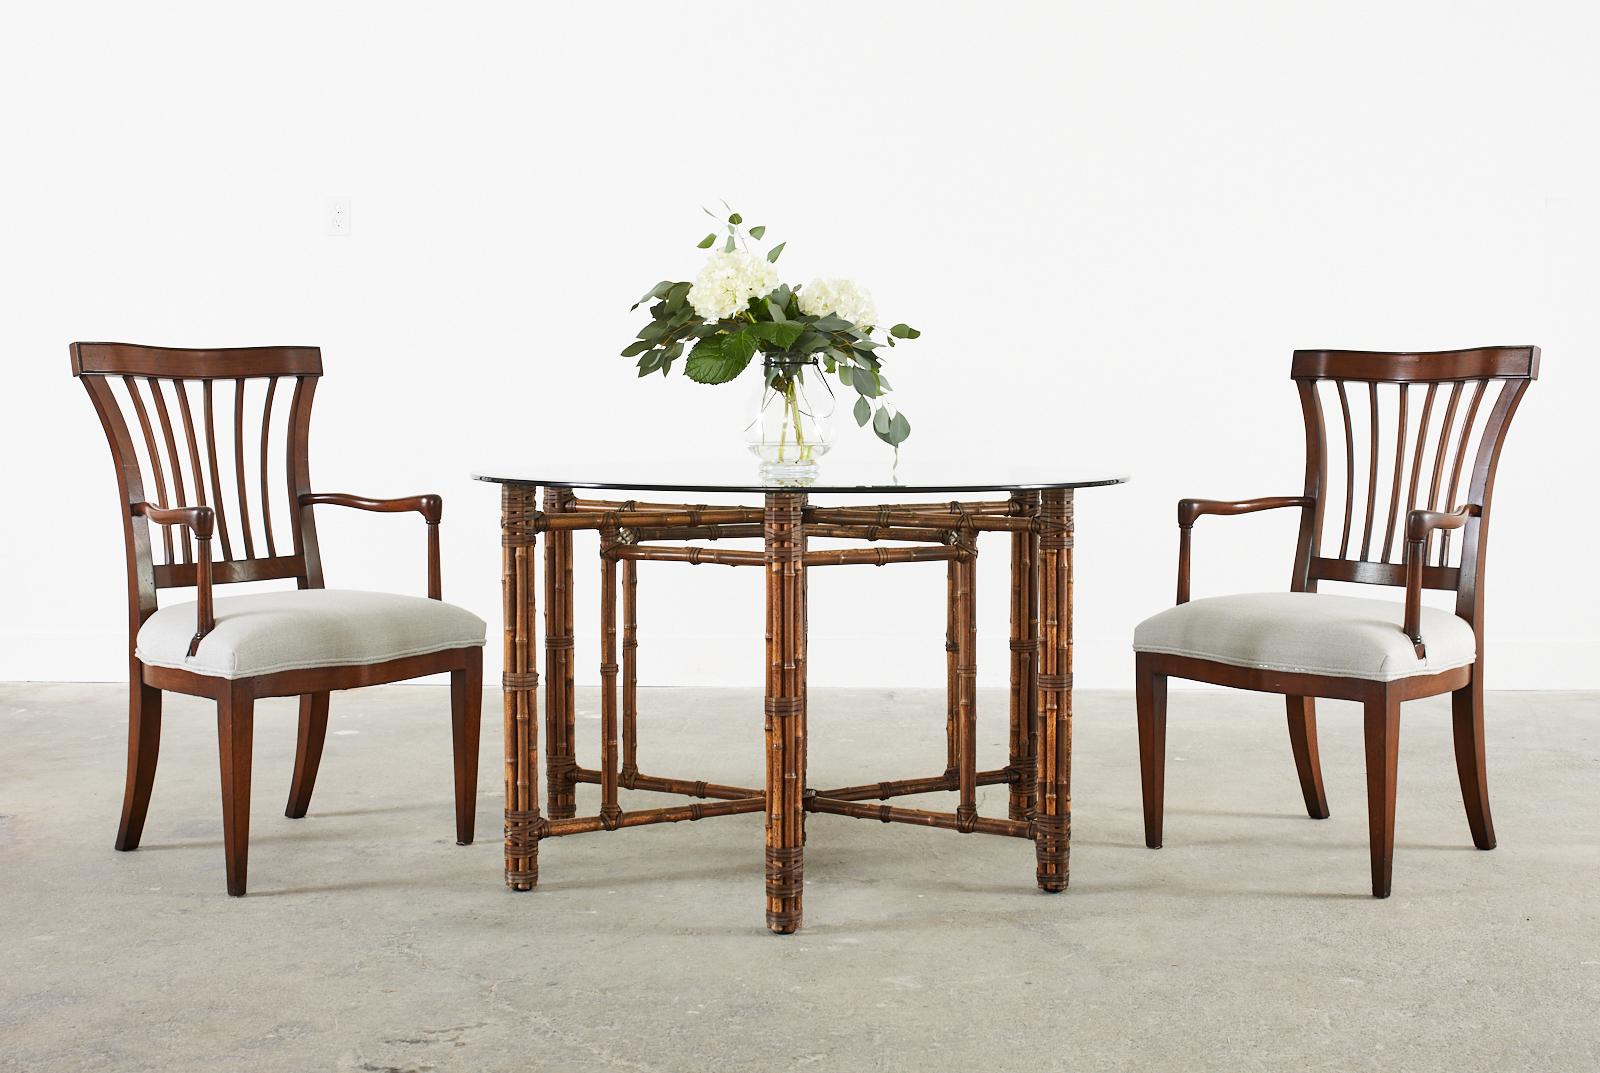 Bespoke set of six hardwood dining armchairs made by John Hall Designs Los Angeles, CA. The chairs feature a flared back with arched slats. The generous seat is bowed in front and has wide arms that gracefully curve back with a lovely profile. Newly